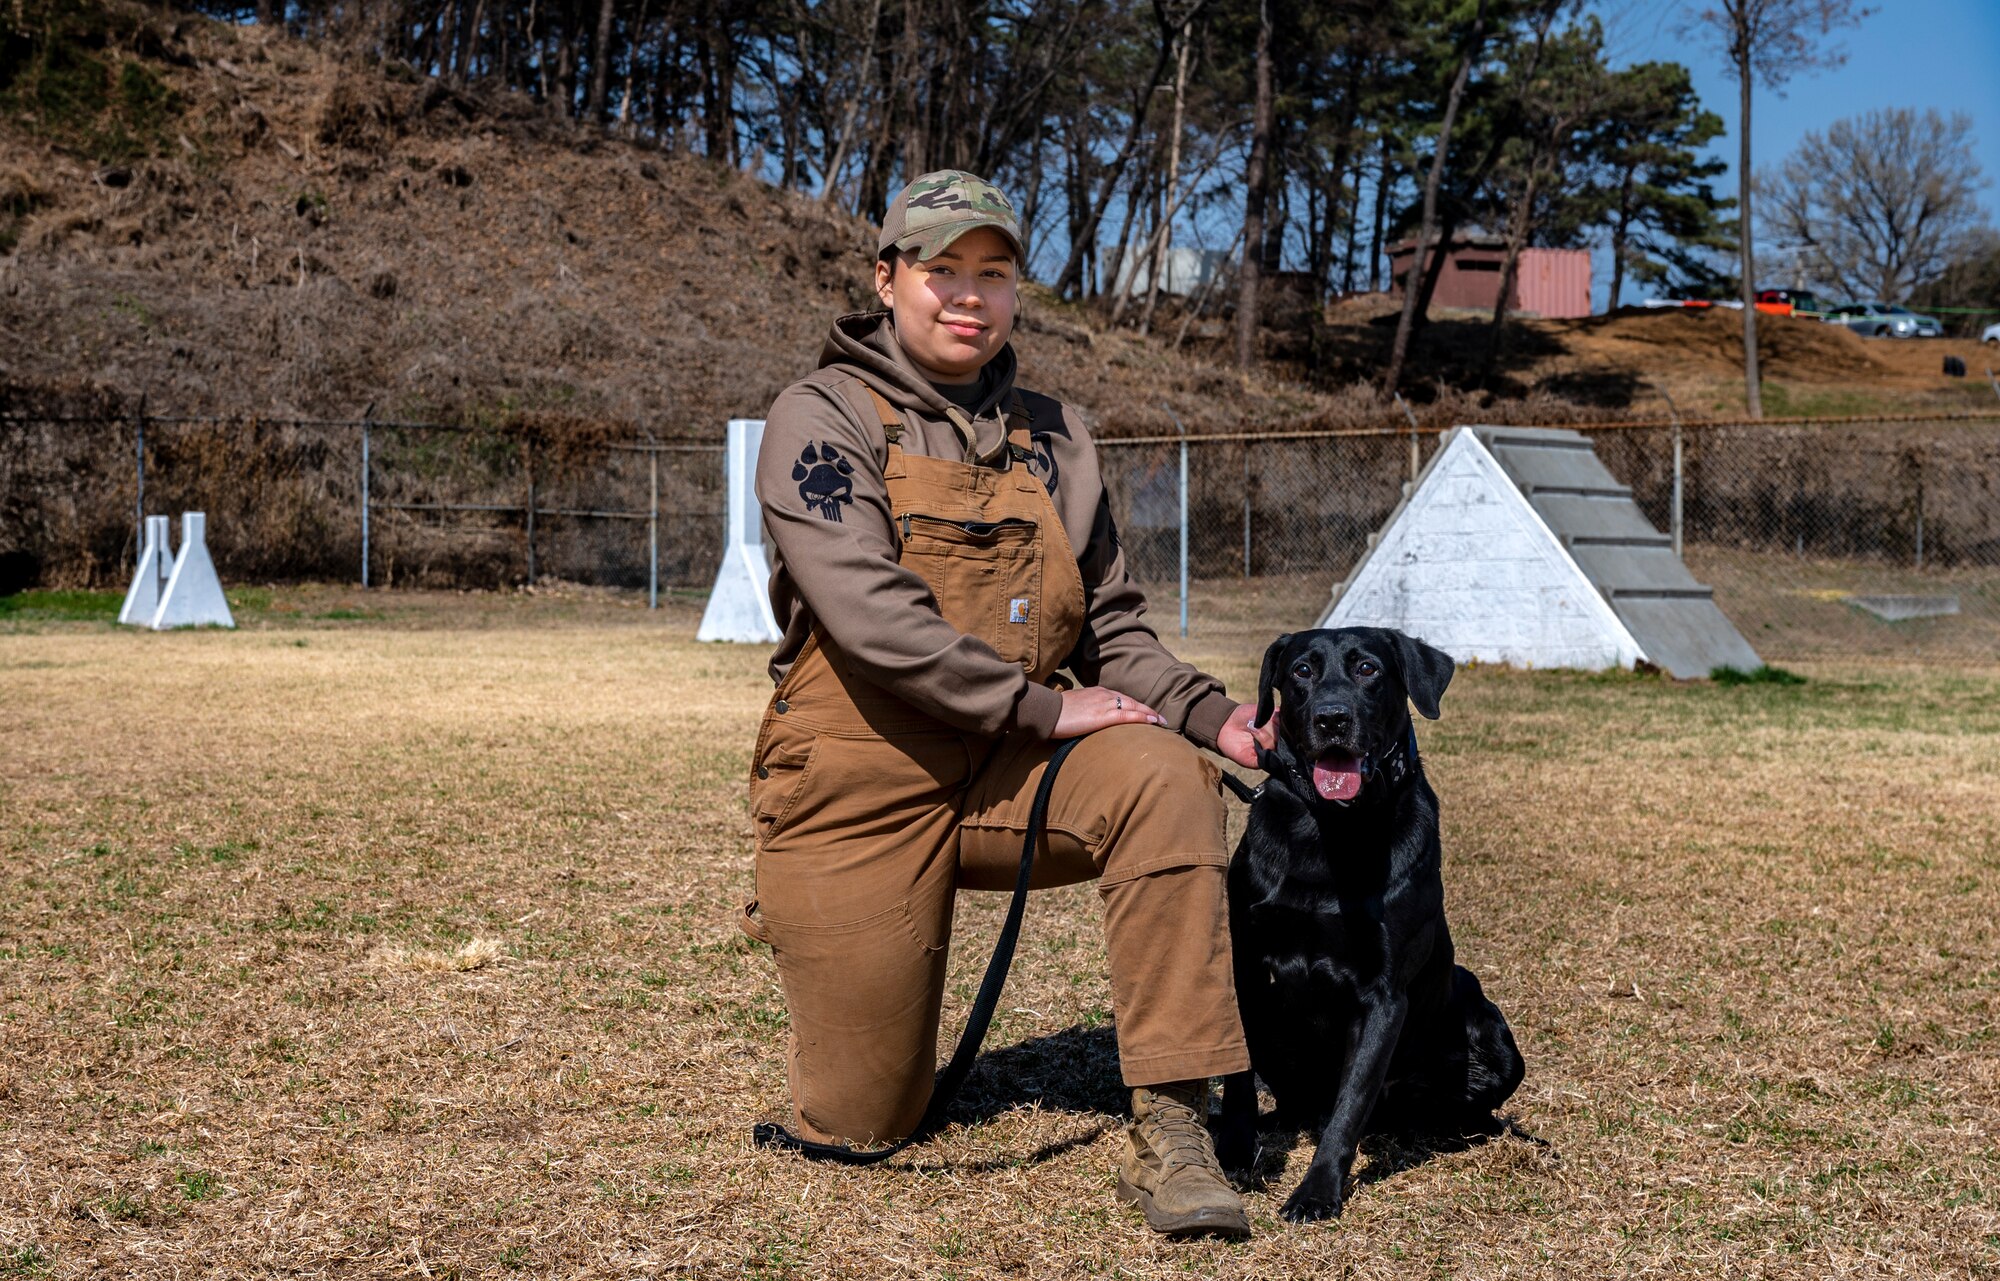 U.S. Air Force Senior Airman Michayla Coleman, 51st Security Forces Squadron, military working dog (MWD) handler poses for a photo with her partner Beatle in celebration of Women’s History Month at Osan Air Base, Republic of Korea, March 27, 2023.